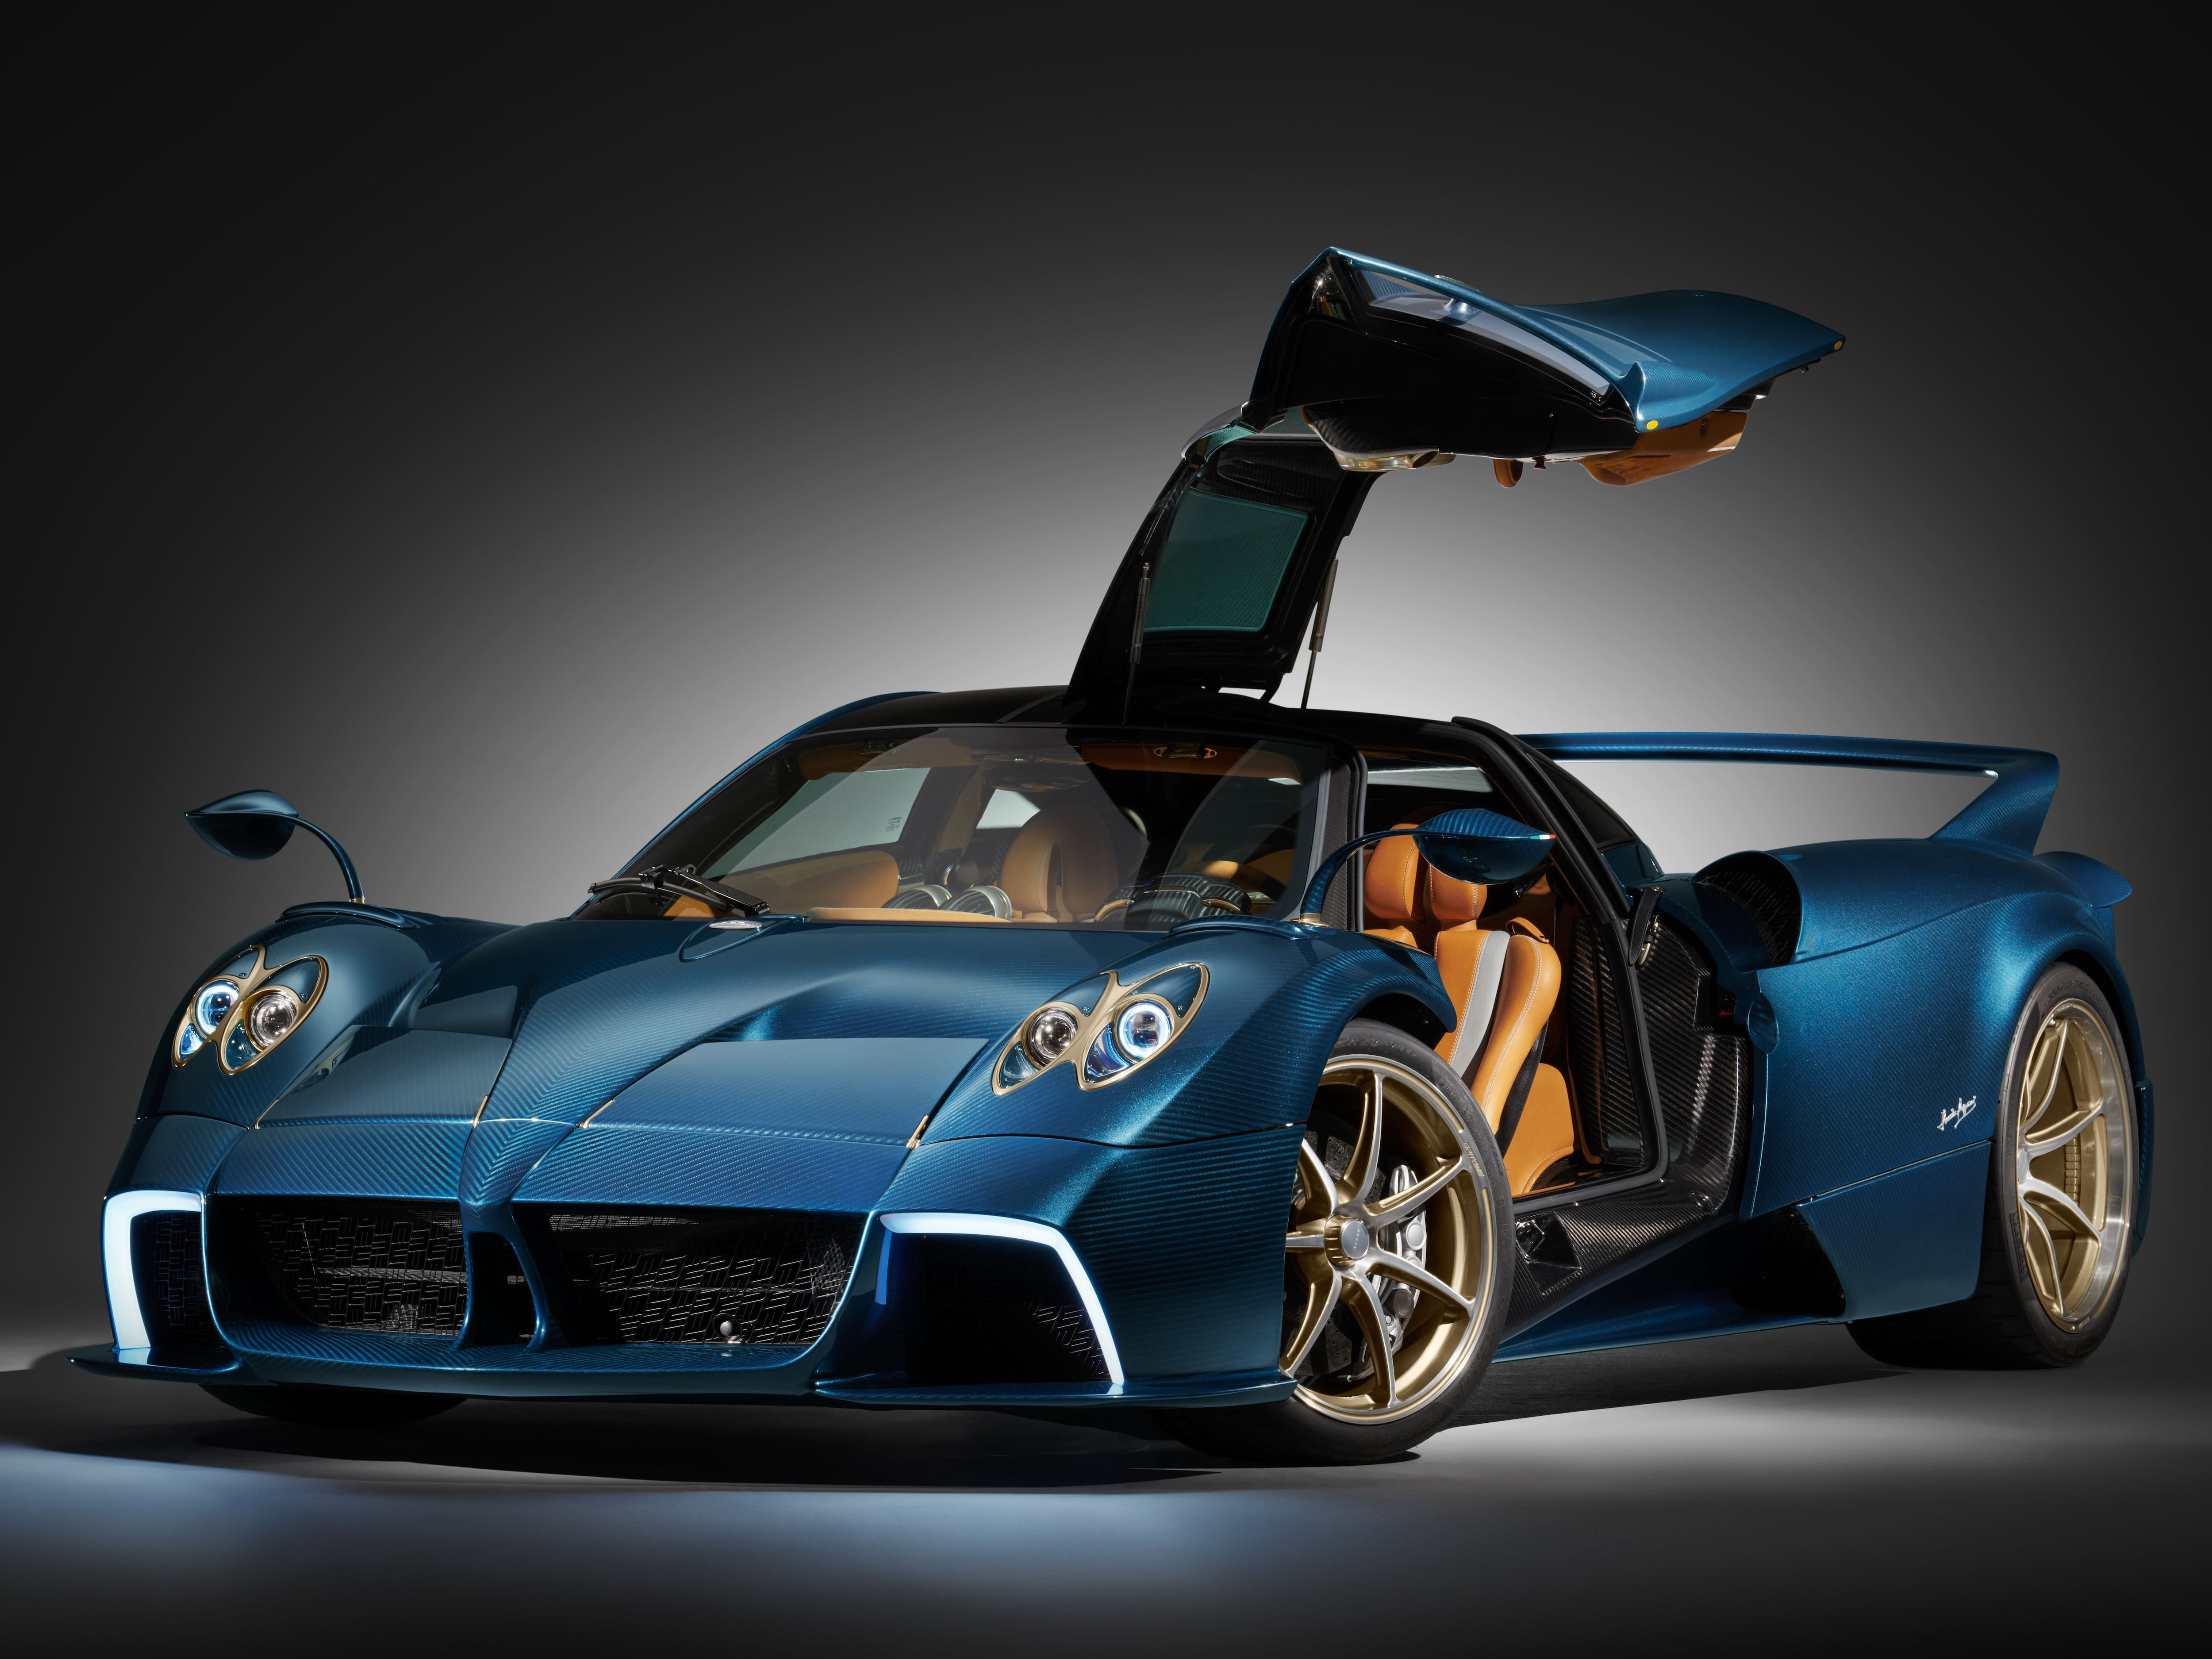 Pagani reveals one-off special with Huayra Epitome